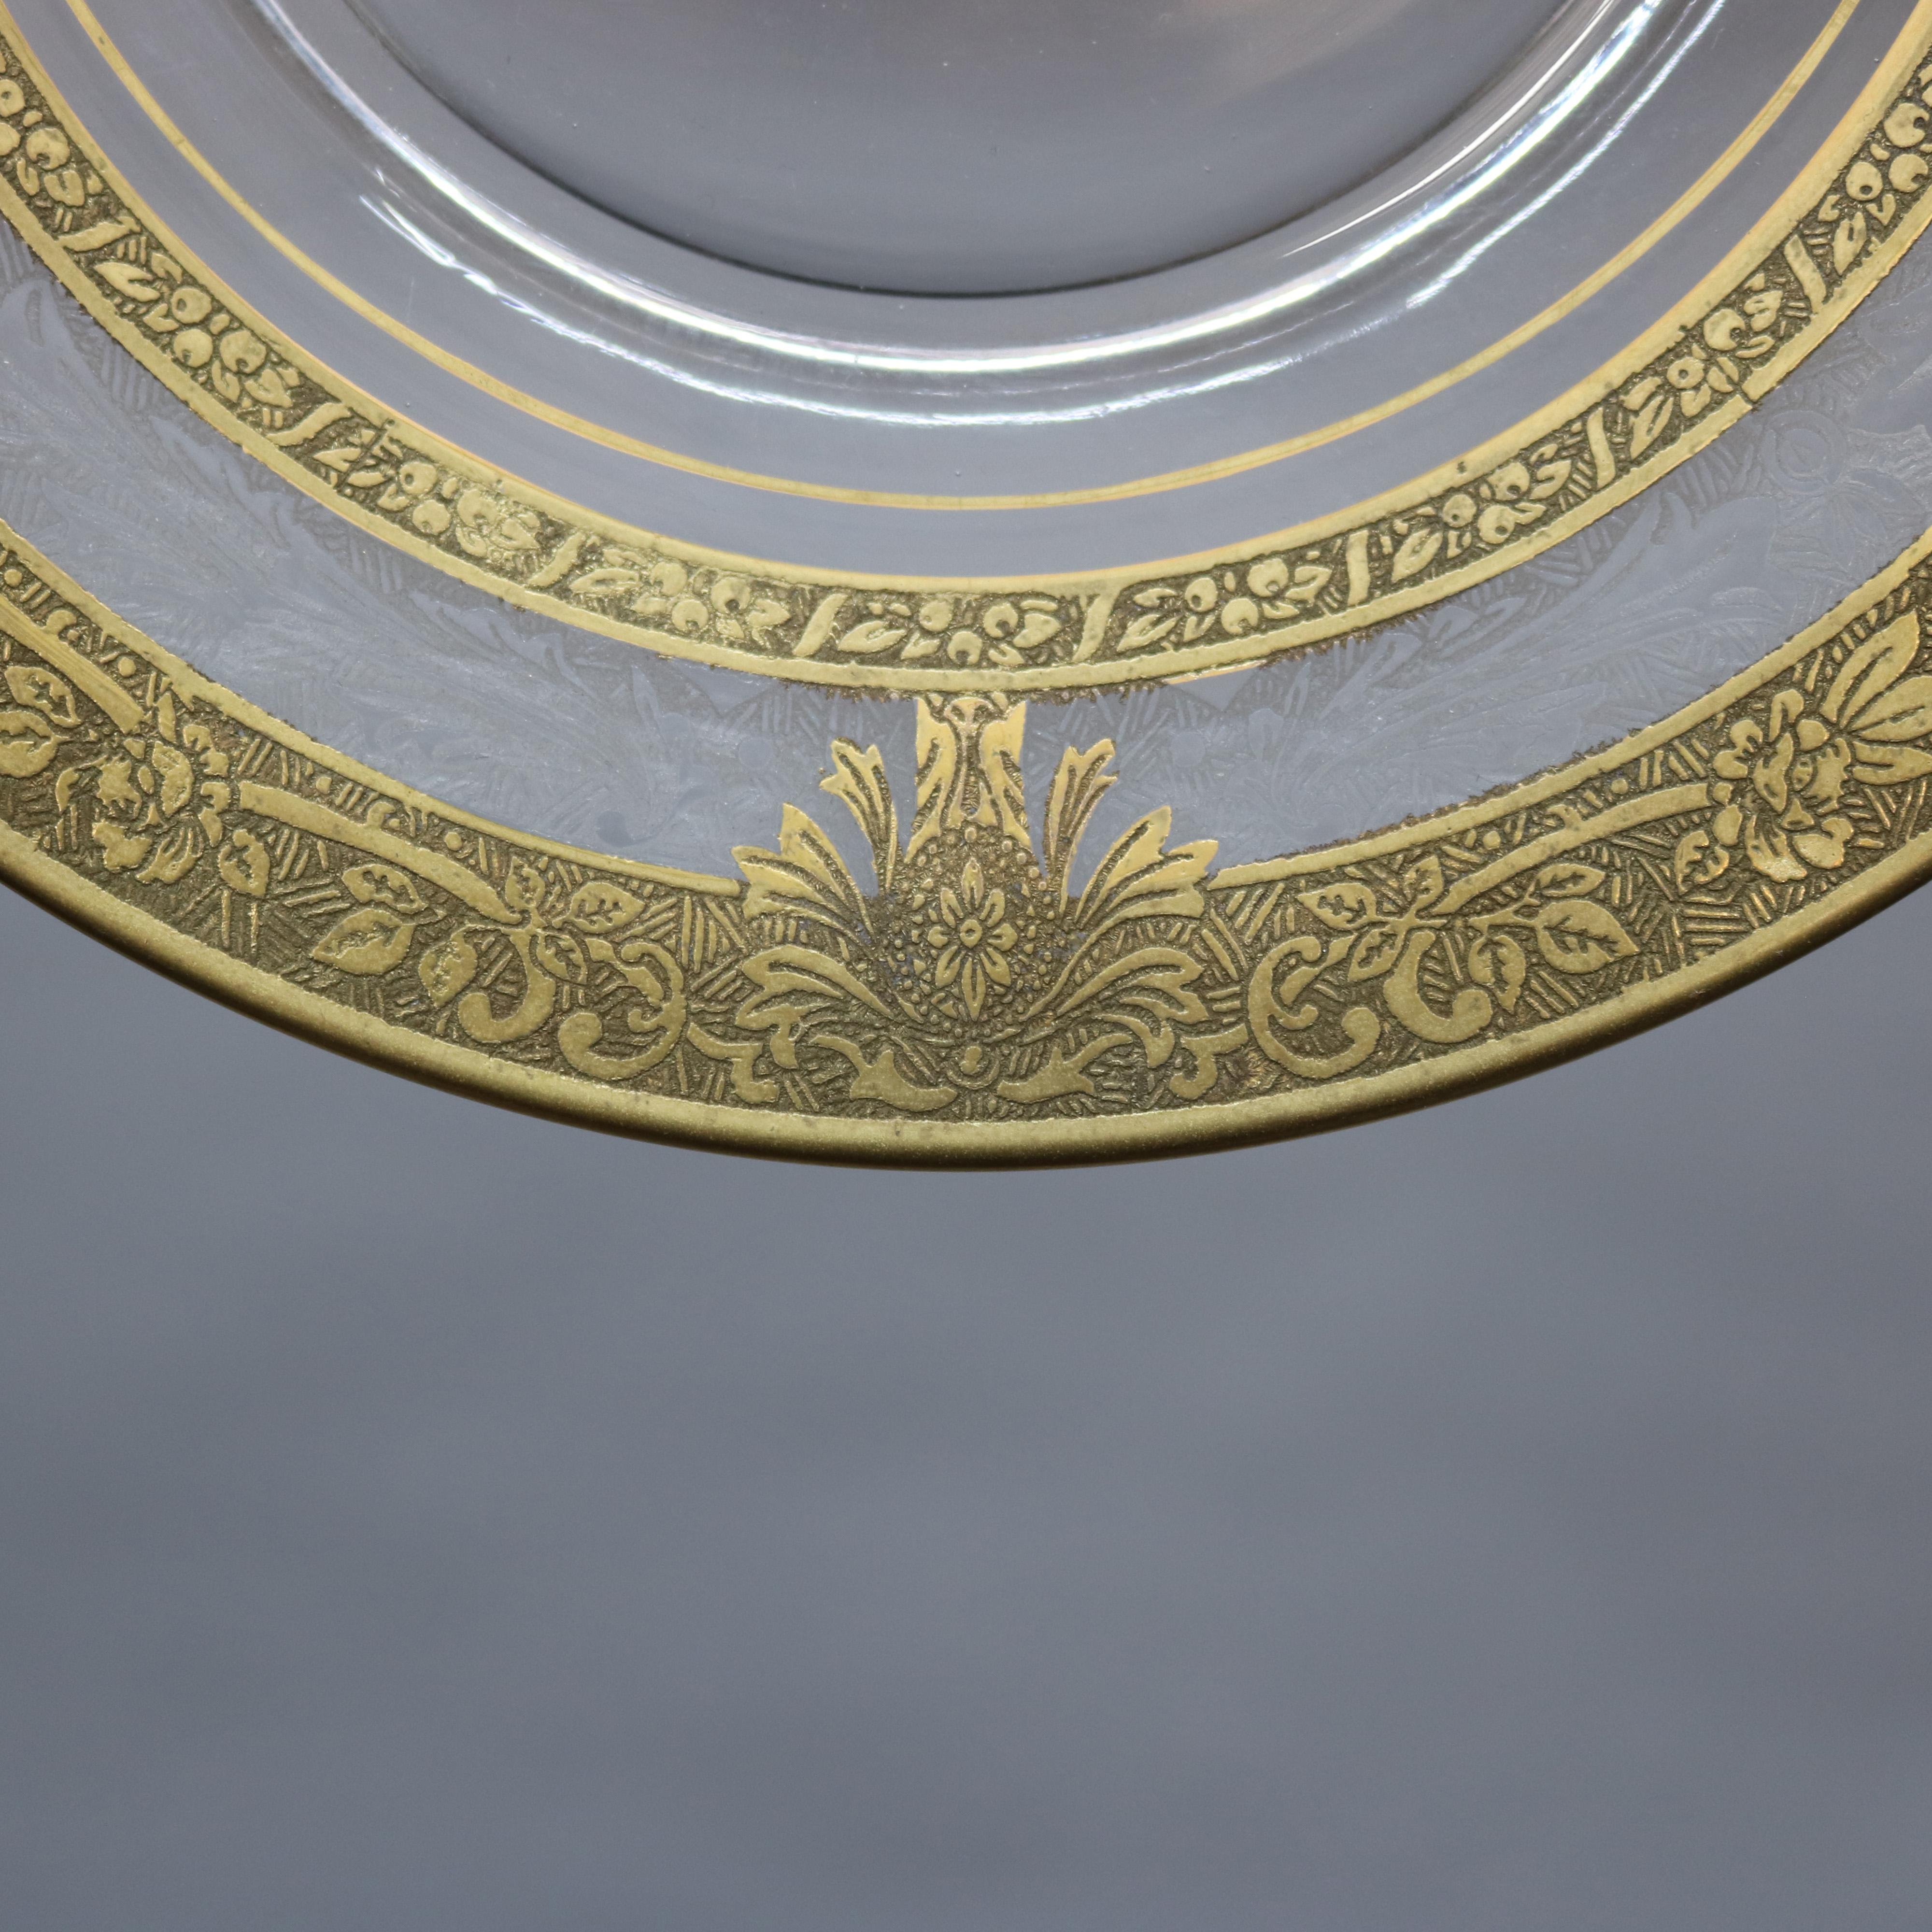 Late Victorian Set of 16 Etched & Gilt Decorated Rimmed Glass Dessert Plates, 20th Century